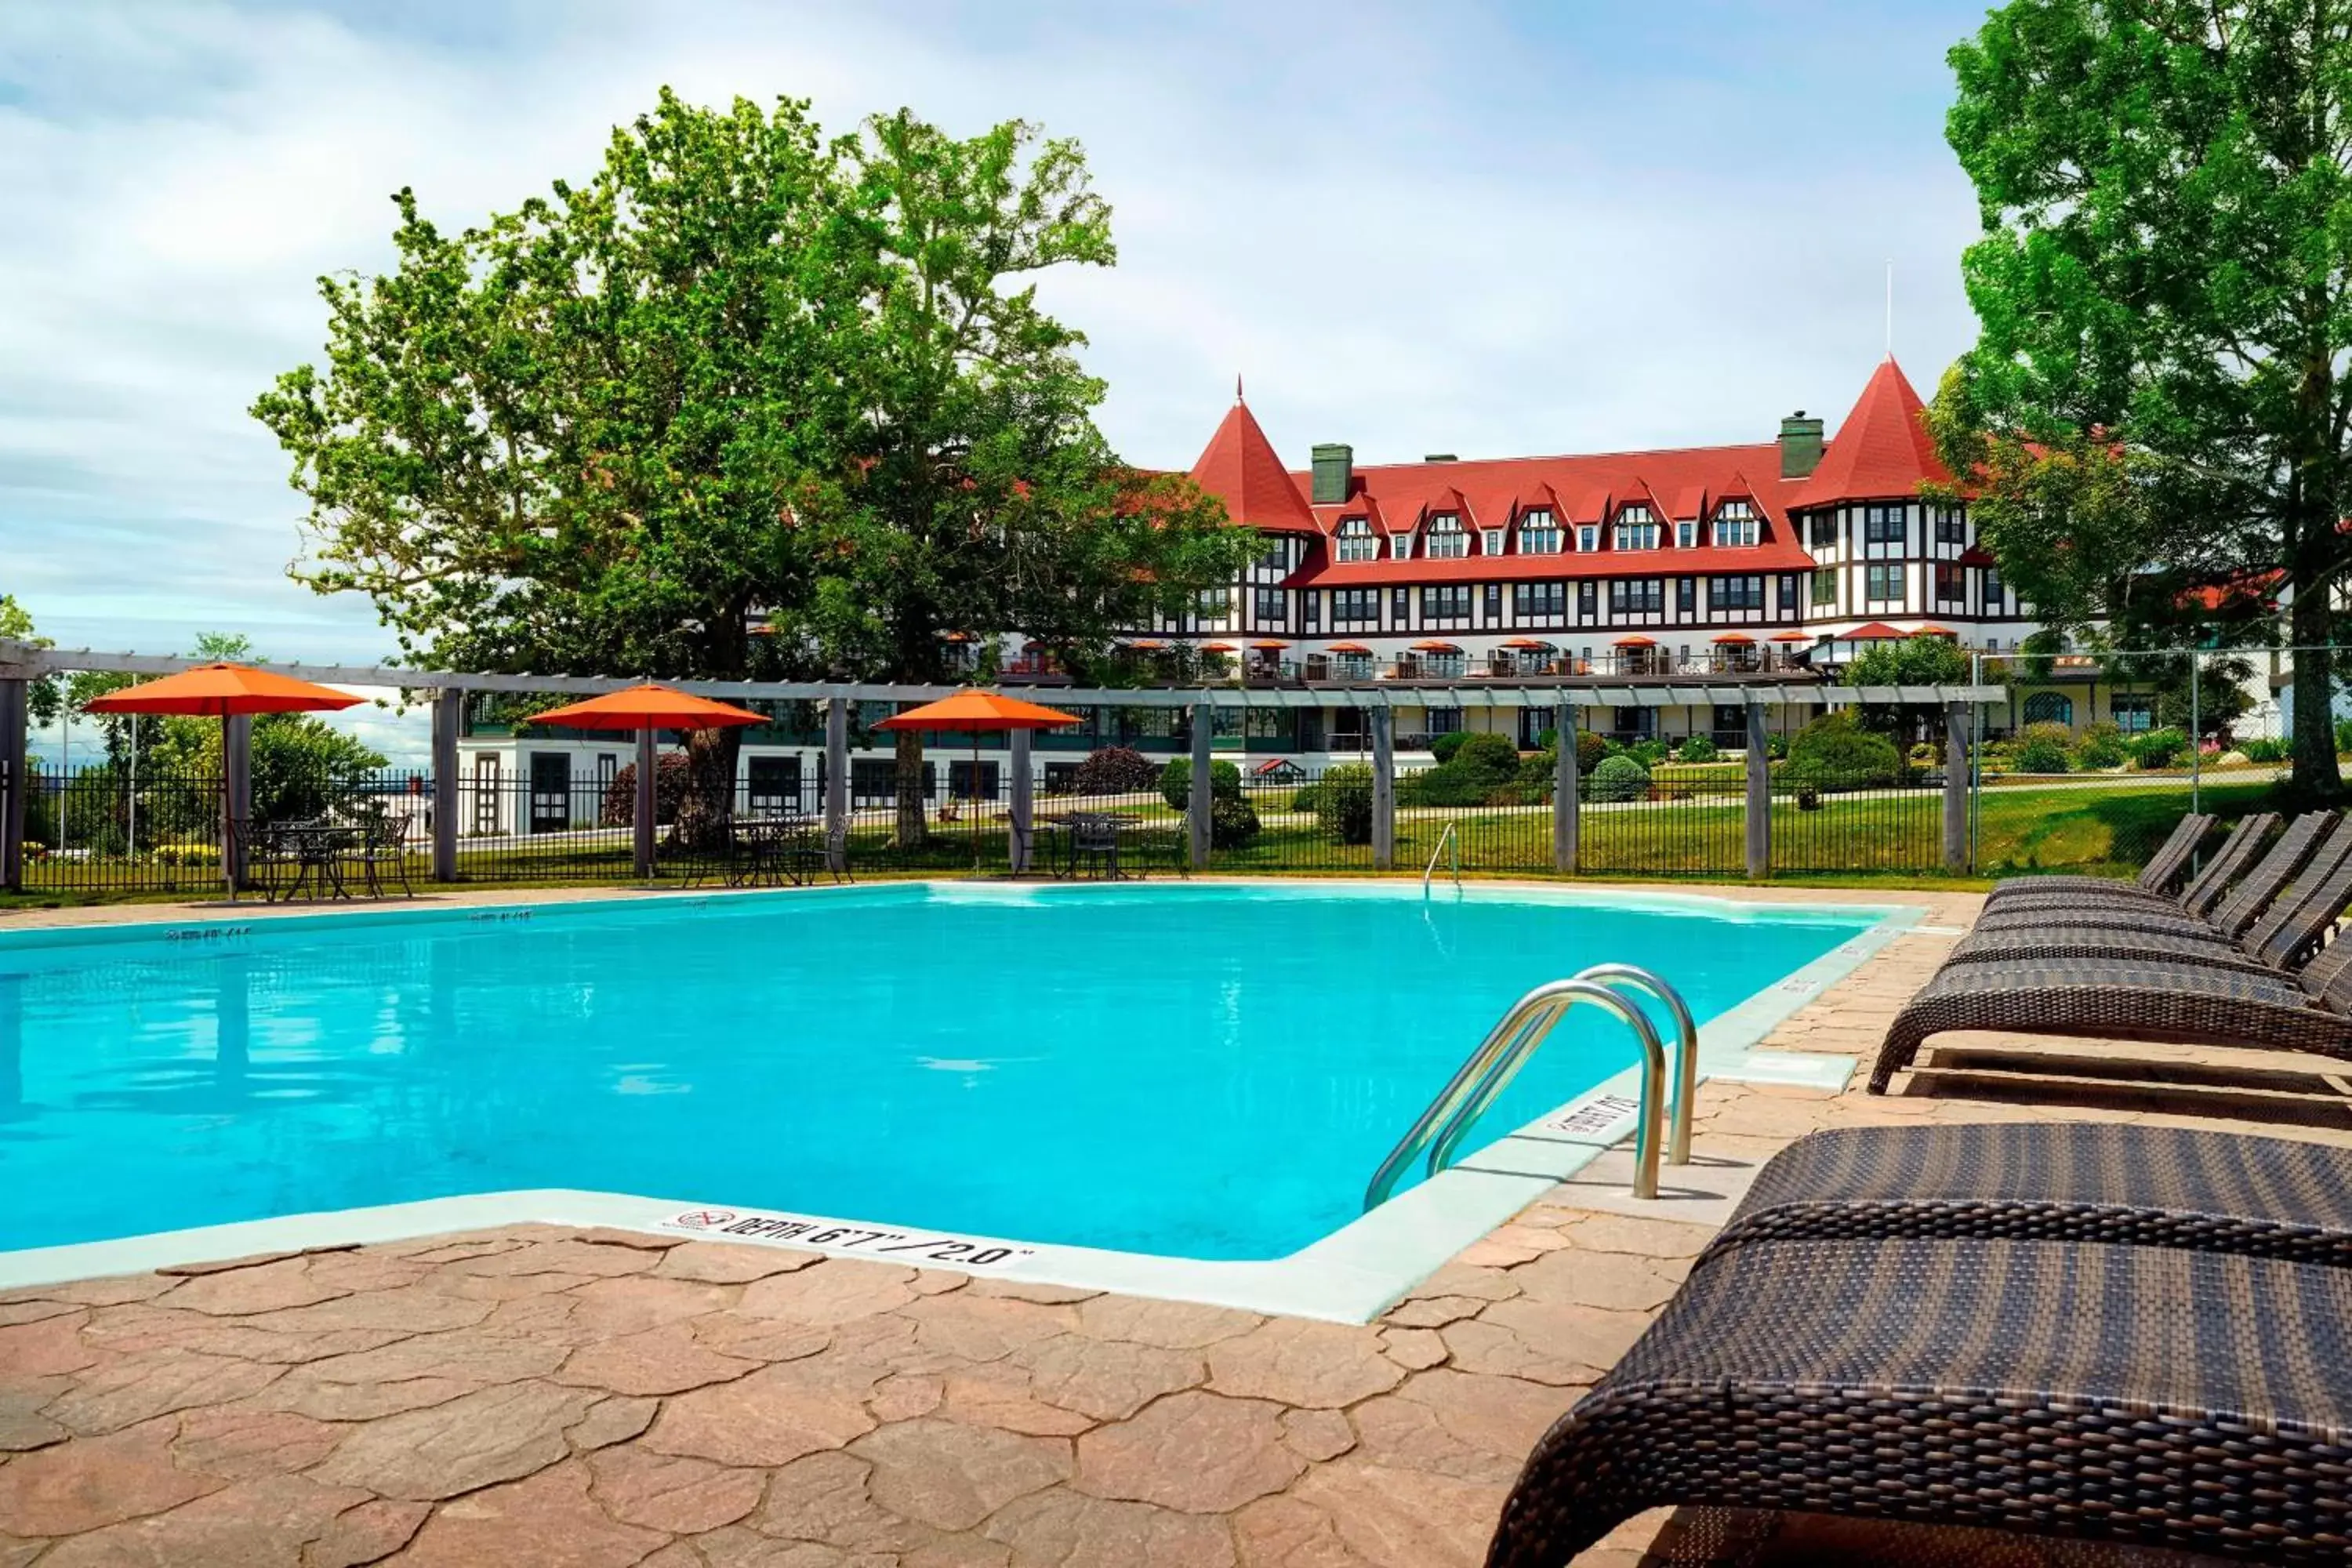 Swimming Pool in The Algonquin Resort St. Andrews by-the-Sea, Autograph Collection